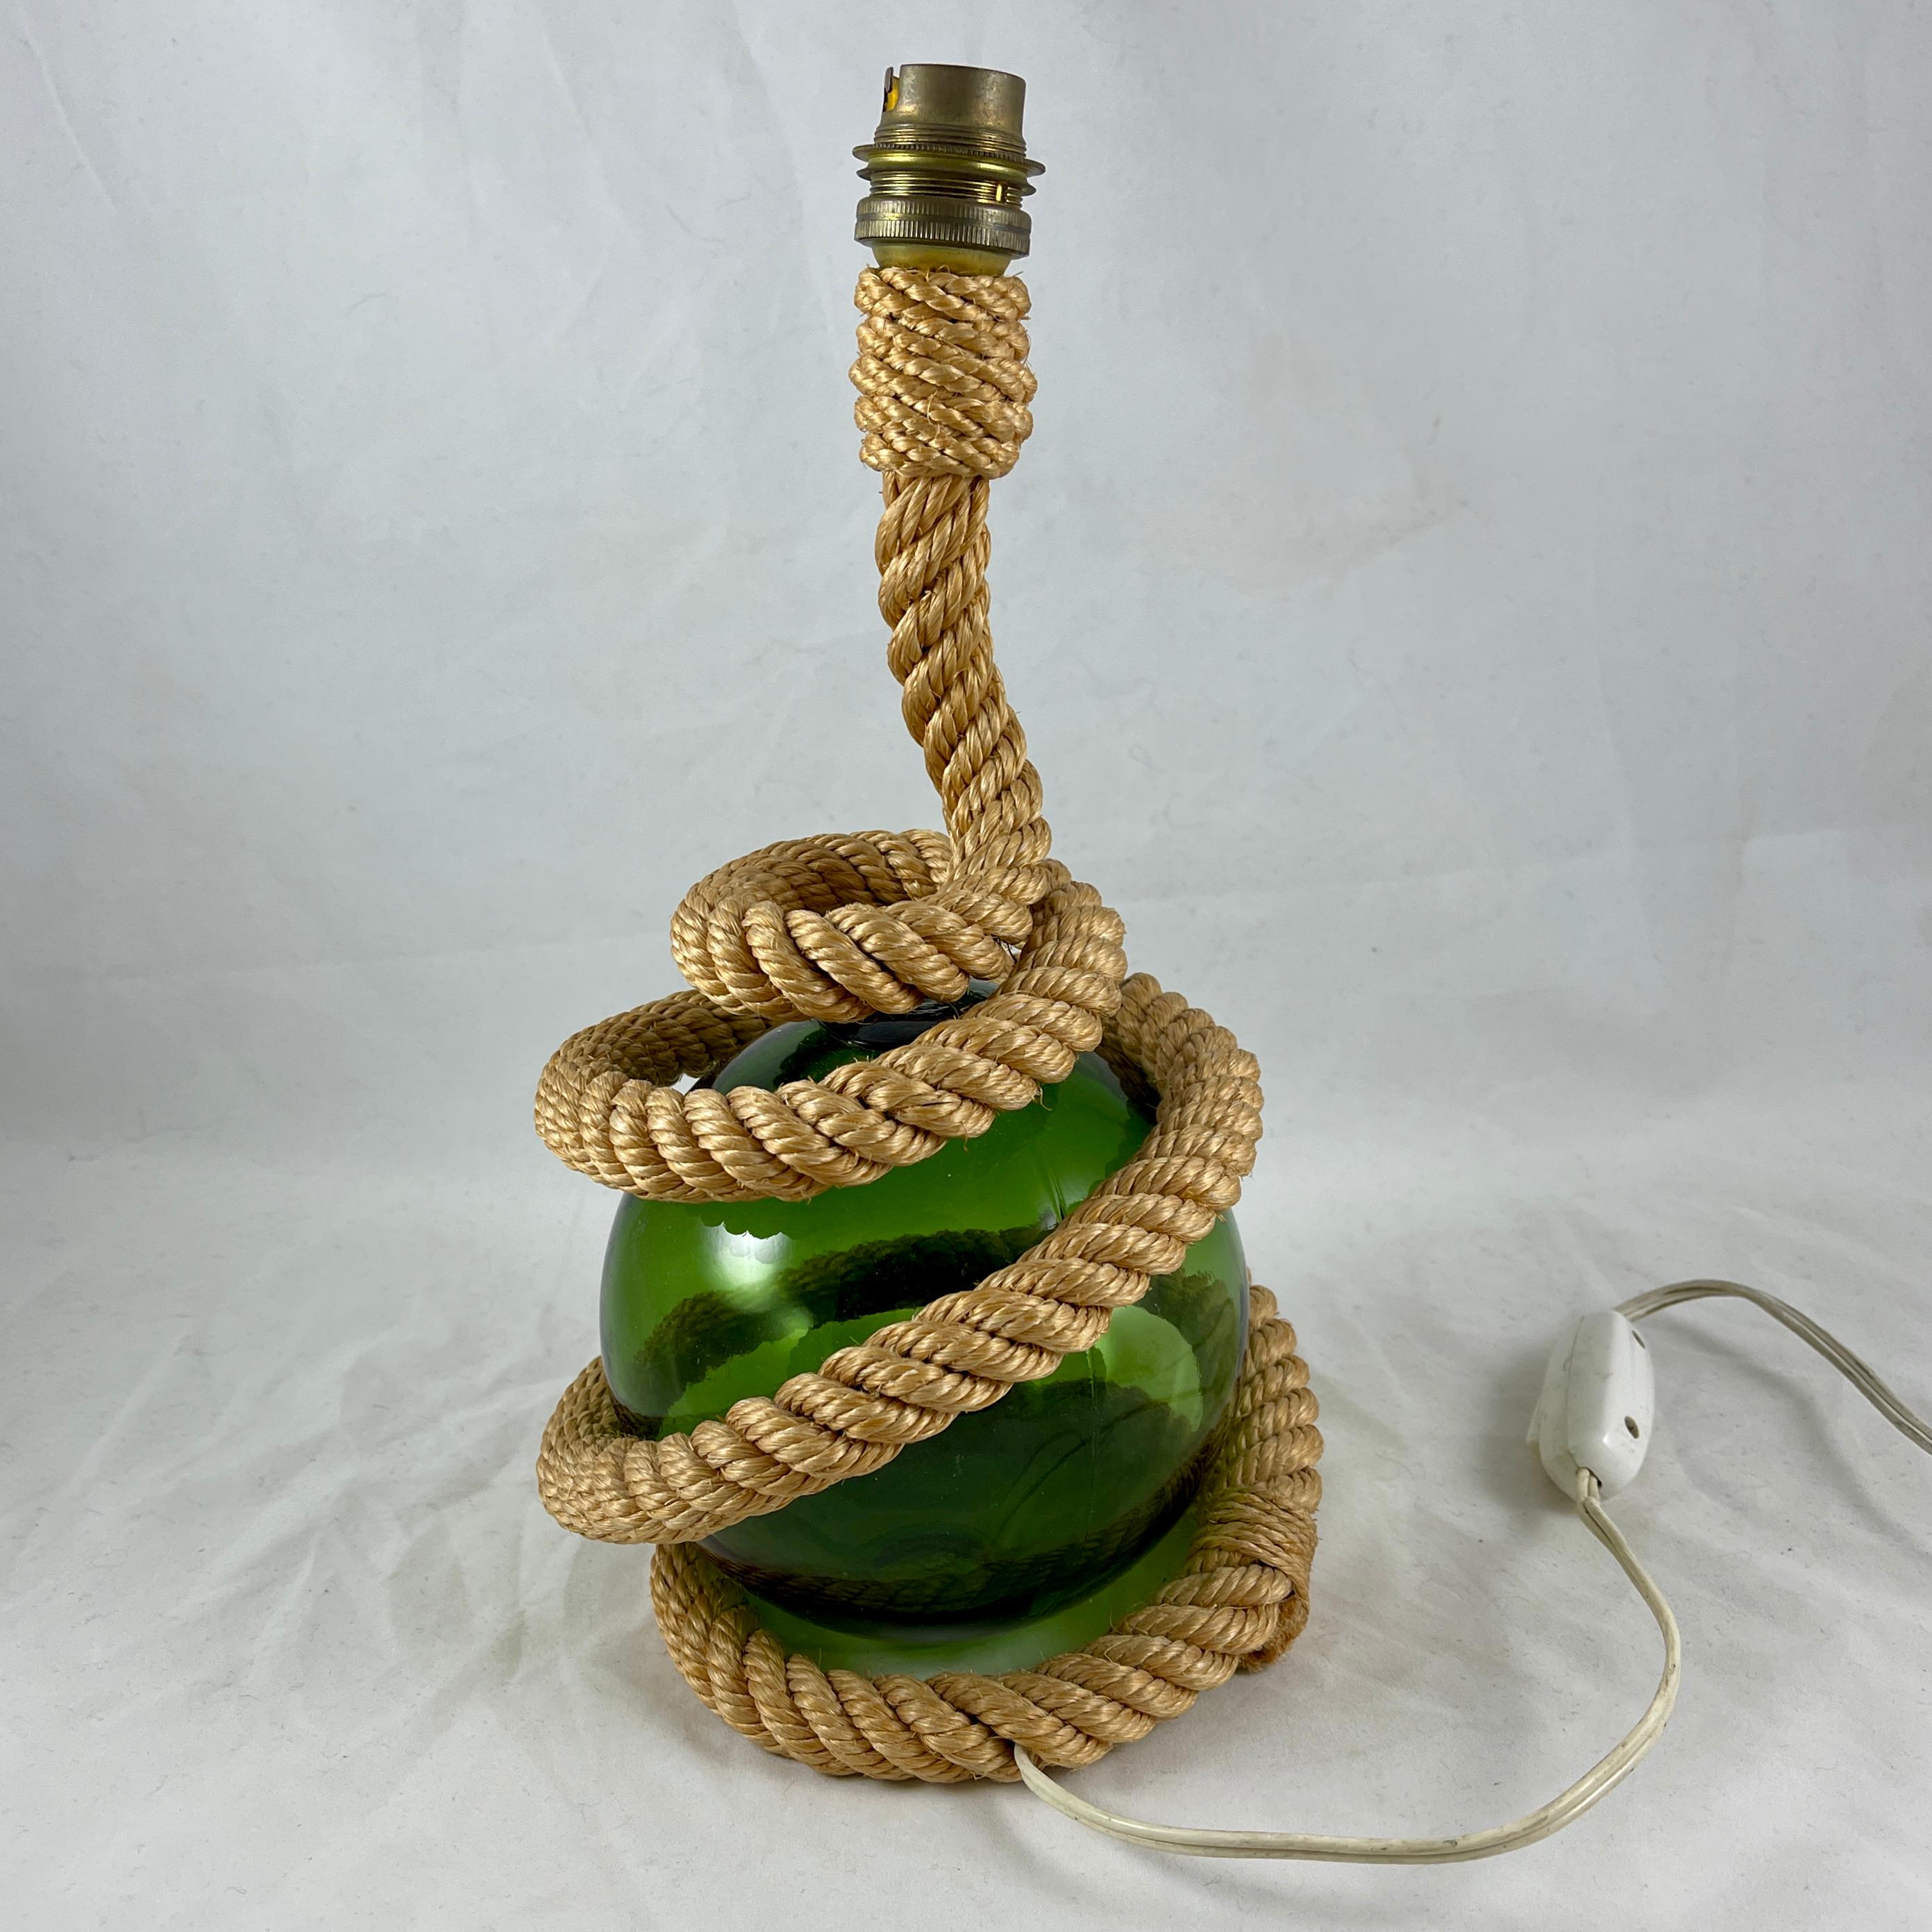 20th Century Audoux Minet Rustic Nautical Rope & Green Glass Ball Table Lamp, circa 1960 For Sale